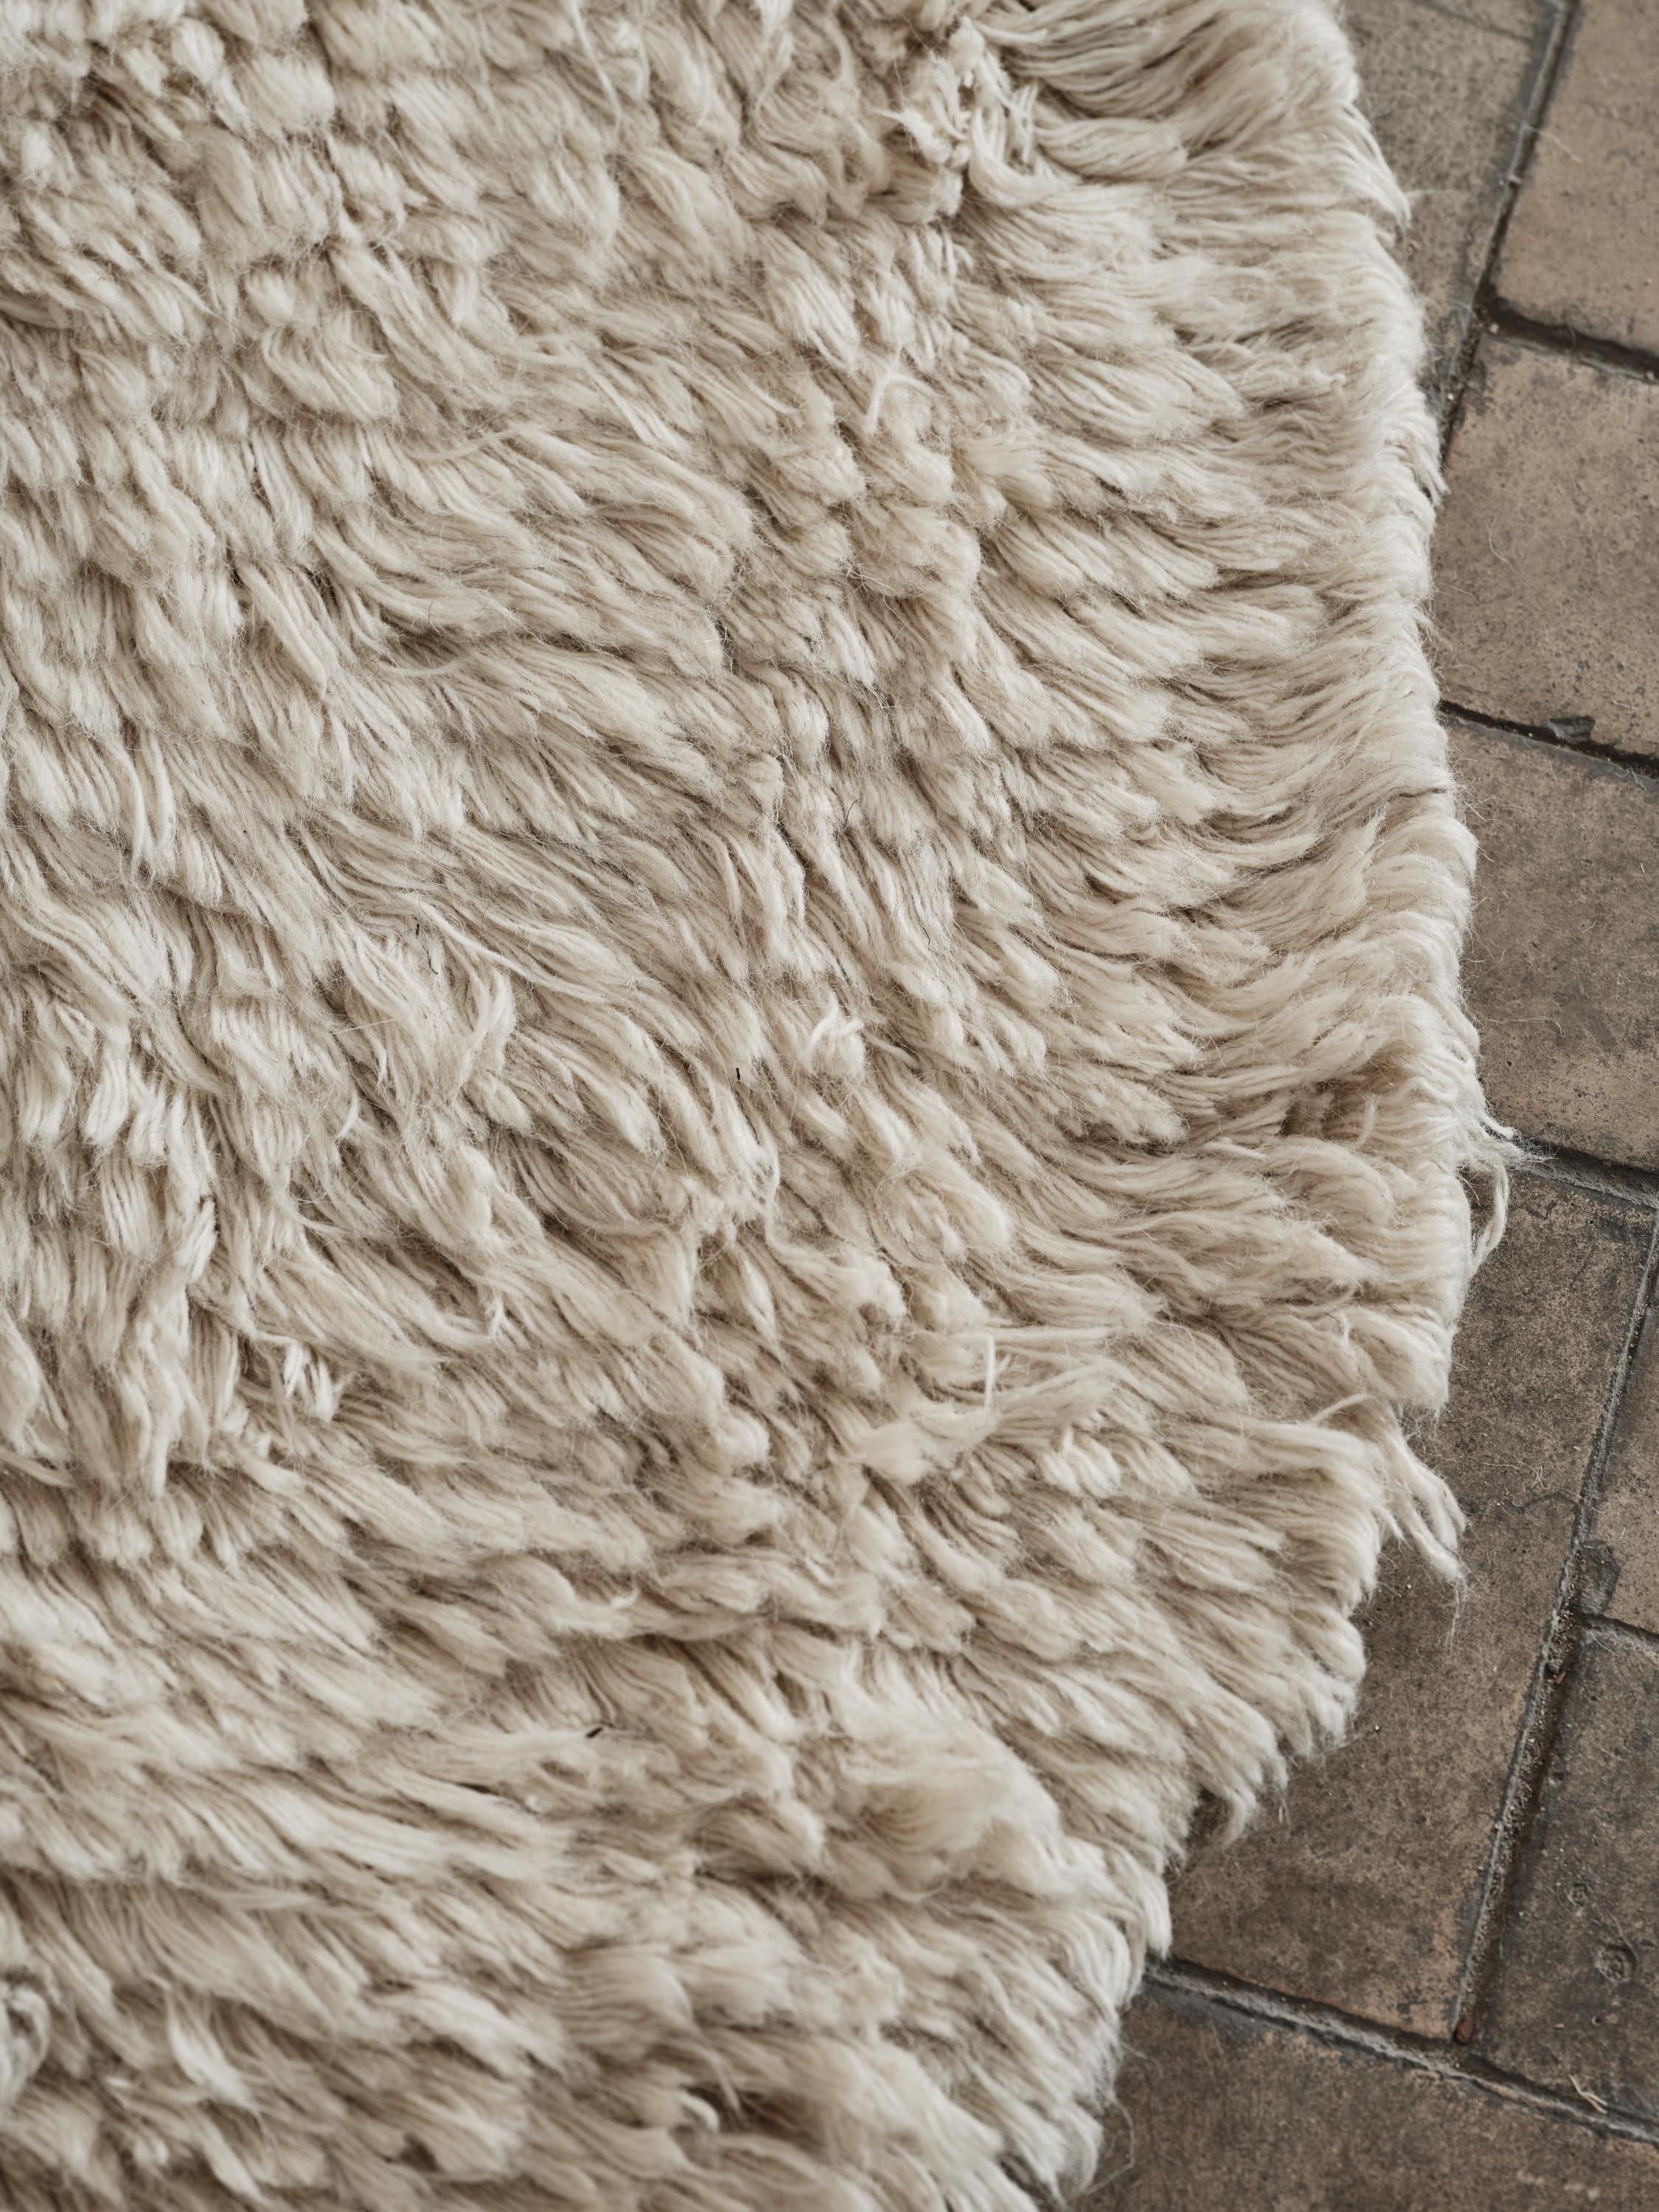 No.09 Rug by Cappelen Dimyr
Dimensions: D290 x H350 cm
Materials: 85% wool 15% cotton

no.09 is a soft and artistic statement piece with an understated bohemian elegance. Its organic and irregular shape is created in a downy crème off-white